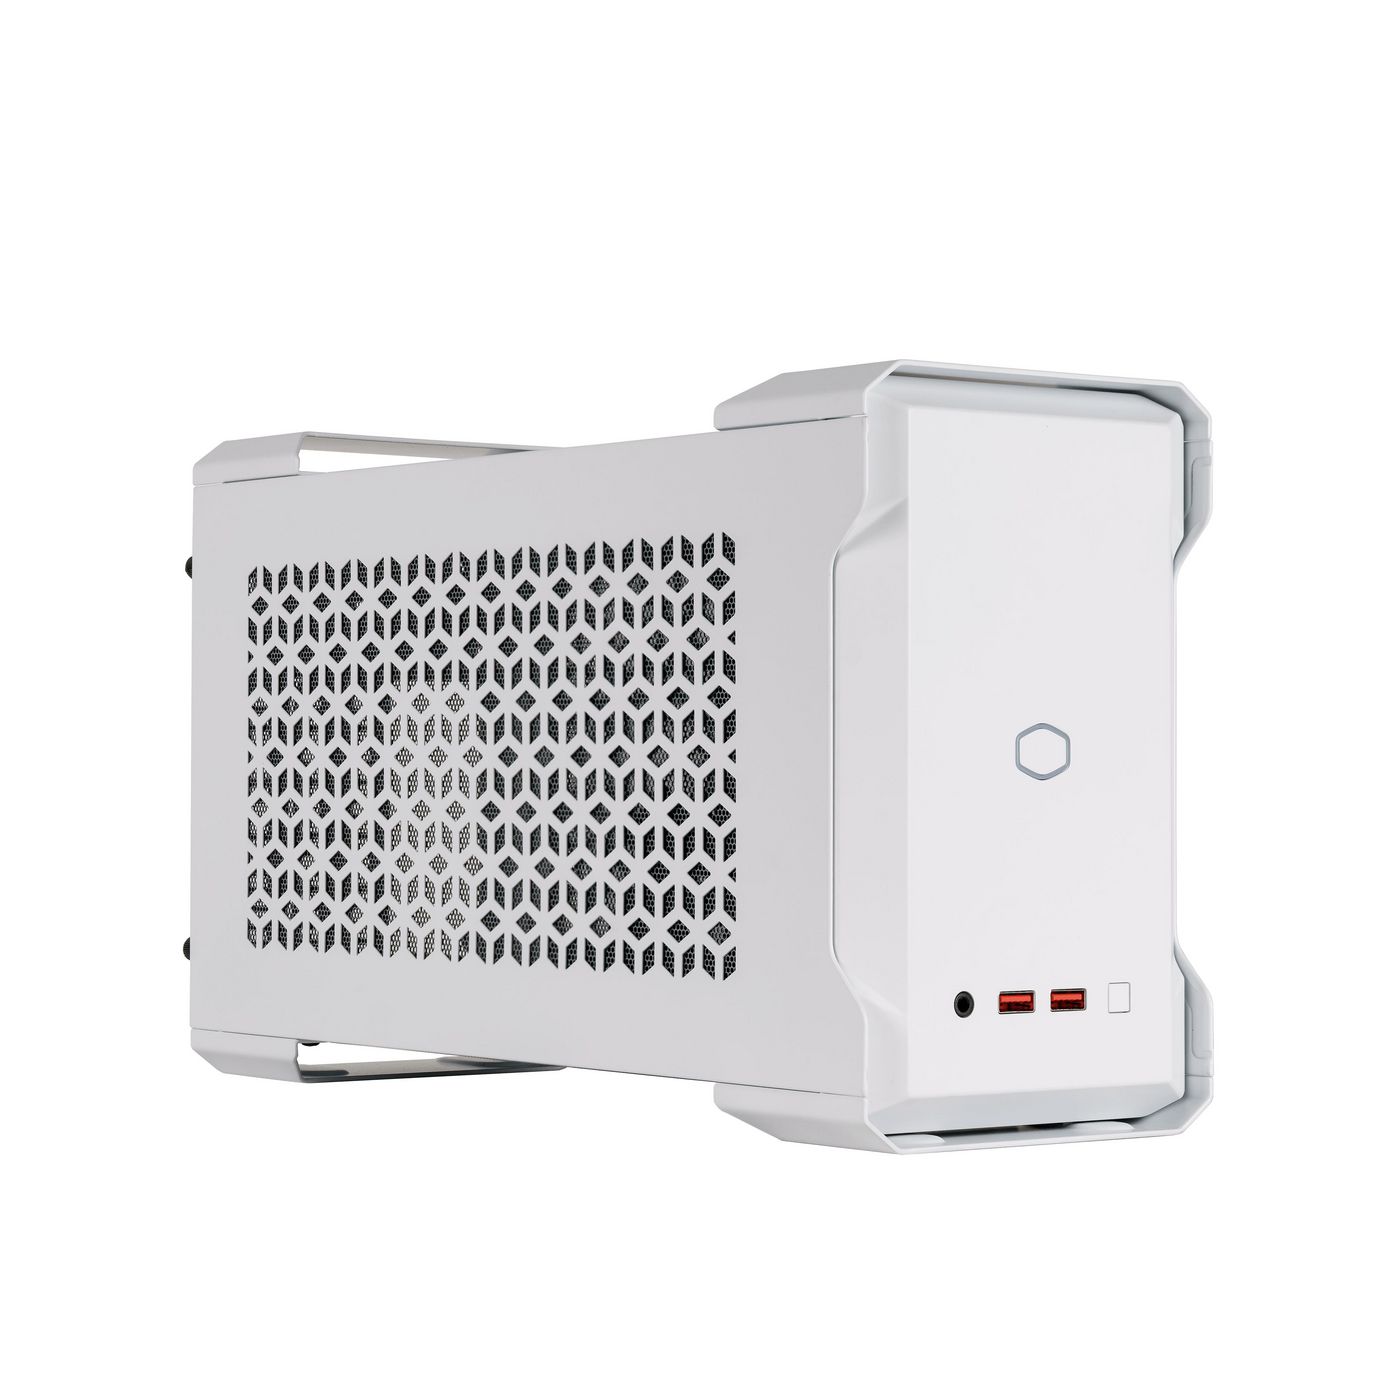 Cooler-Master MCM-NC100-WNNA65-S00 W128268323 Mastercase Nc100 Small Form 